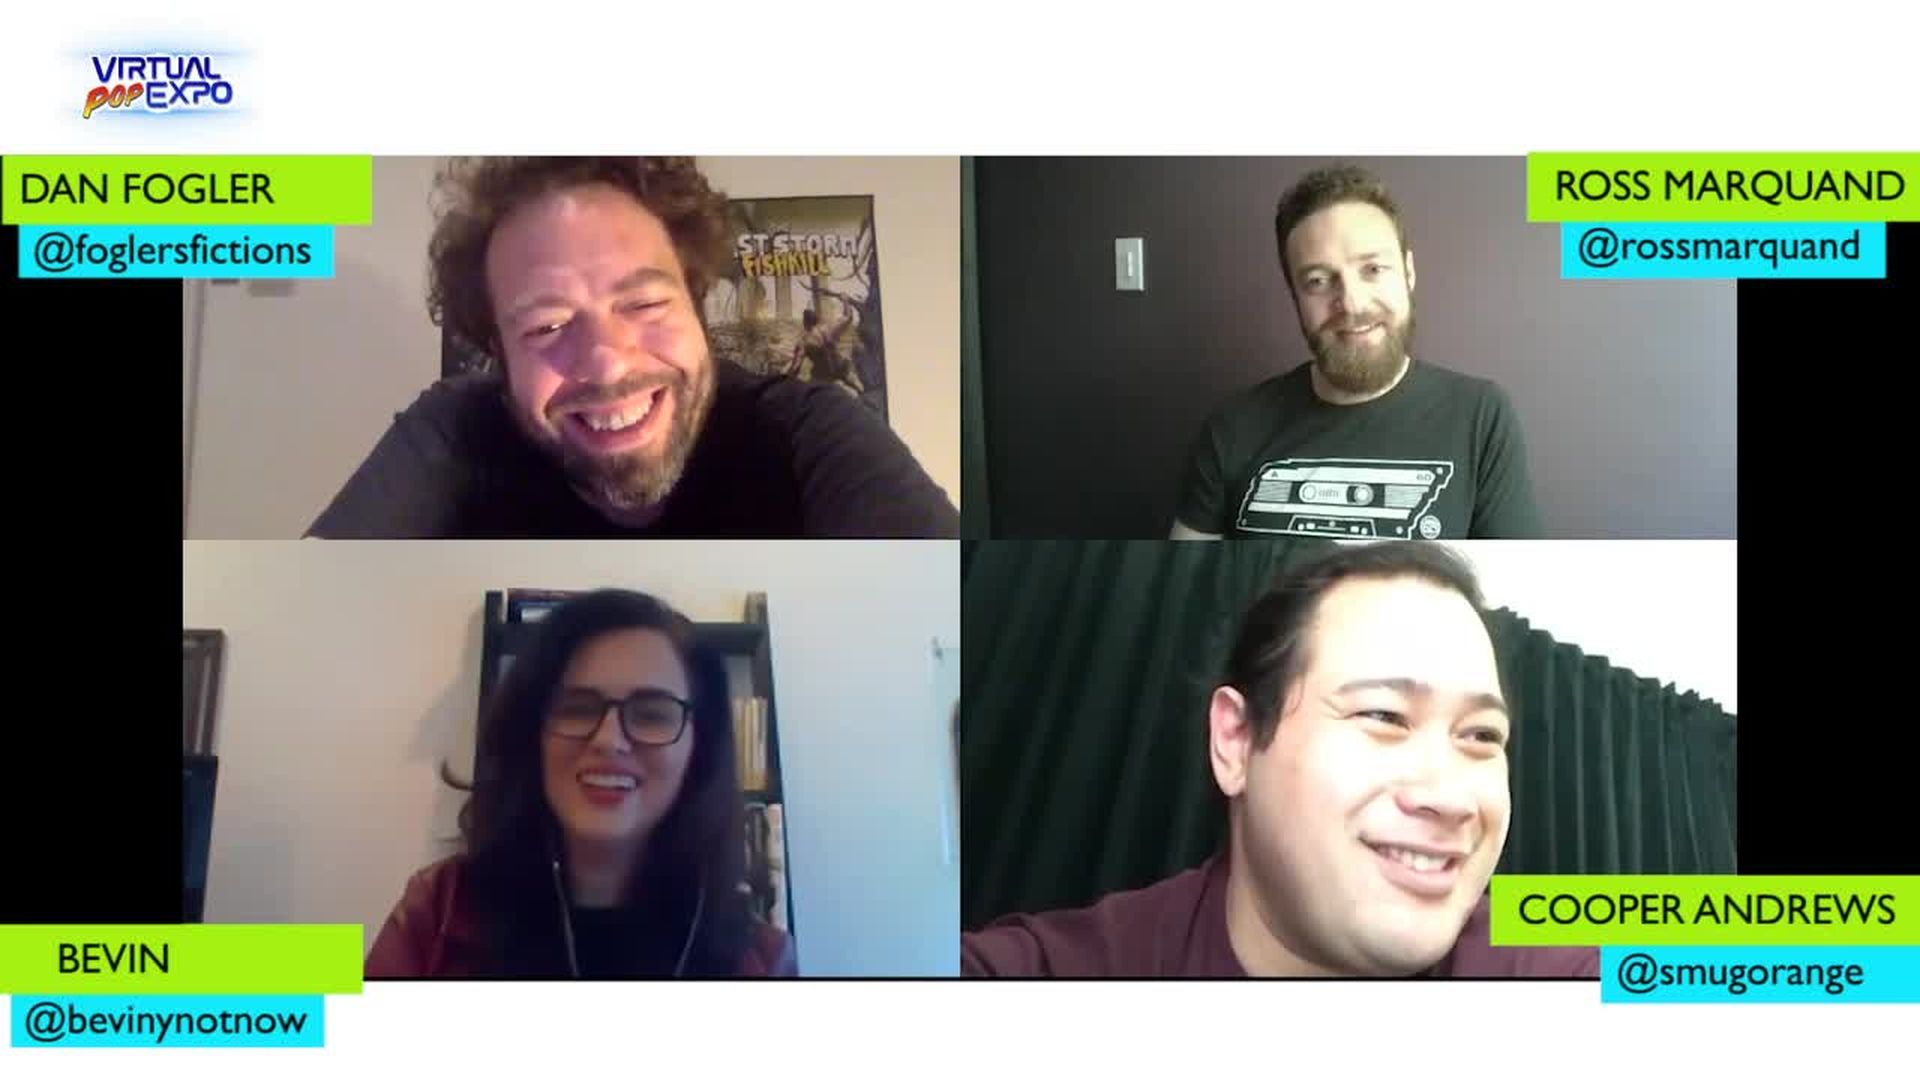 The Virtual Pop Expo: Dan Fogler and the 4DXperience